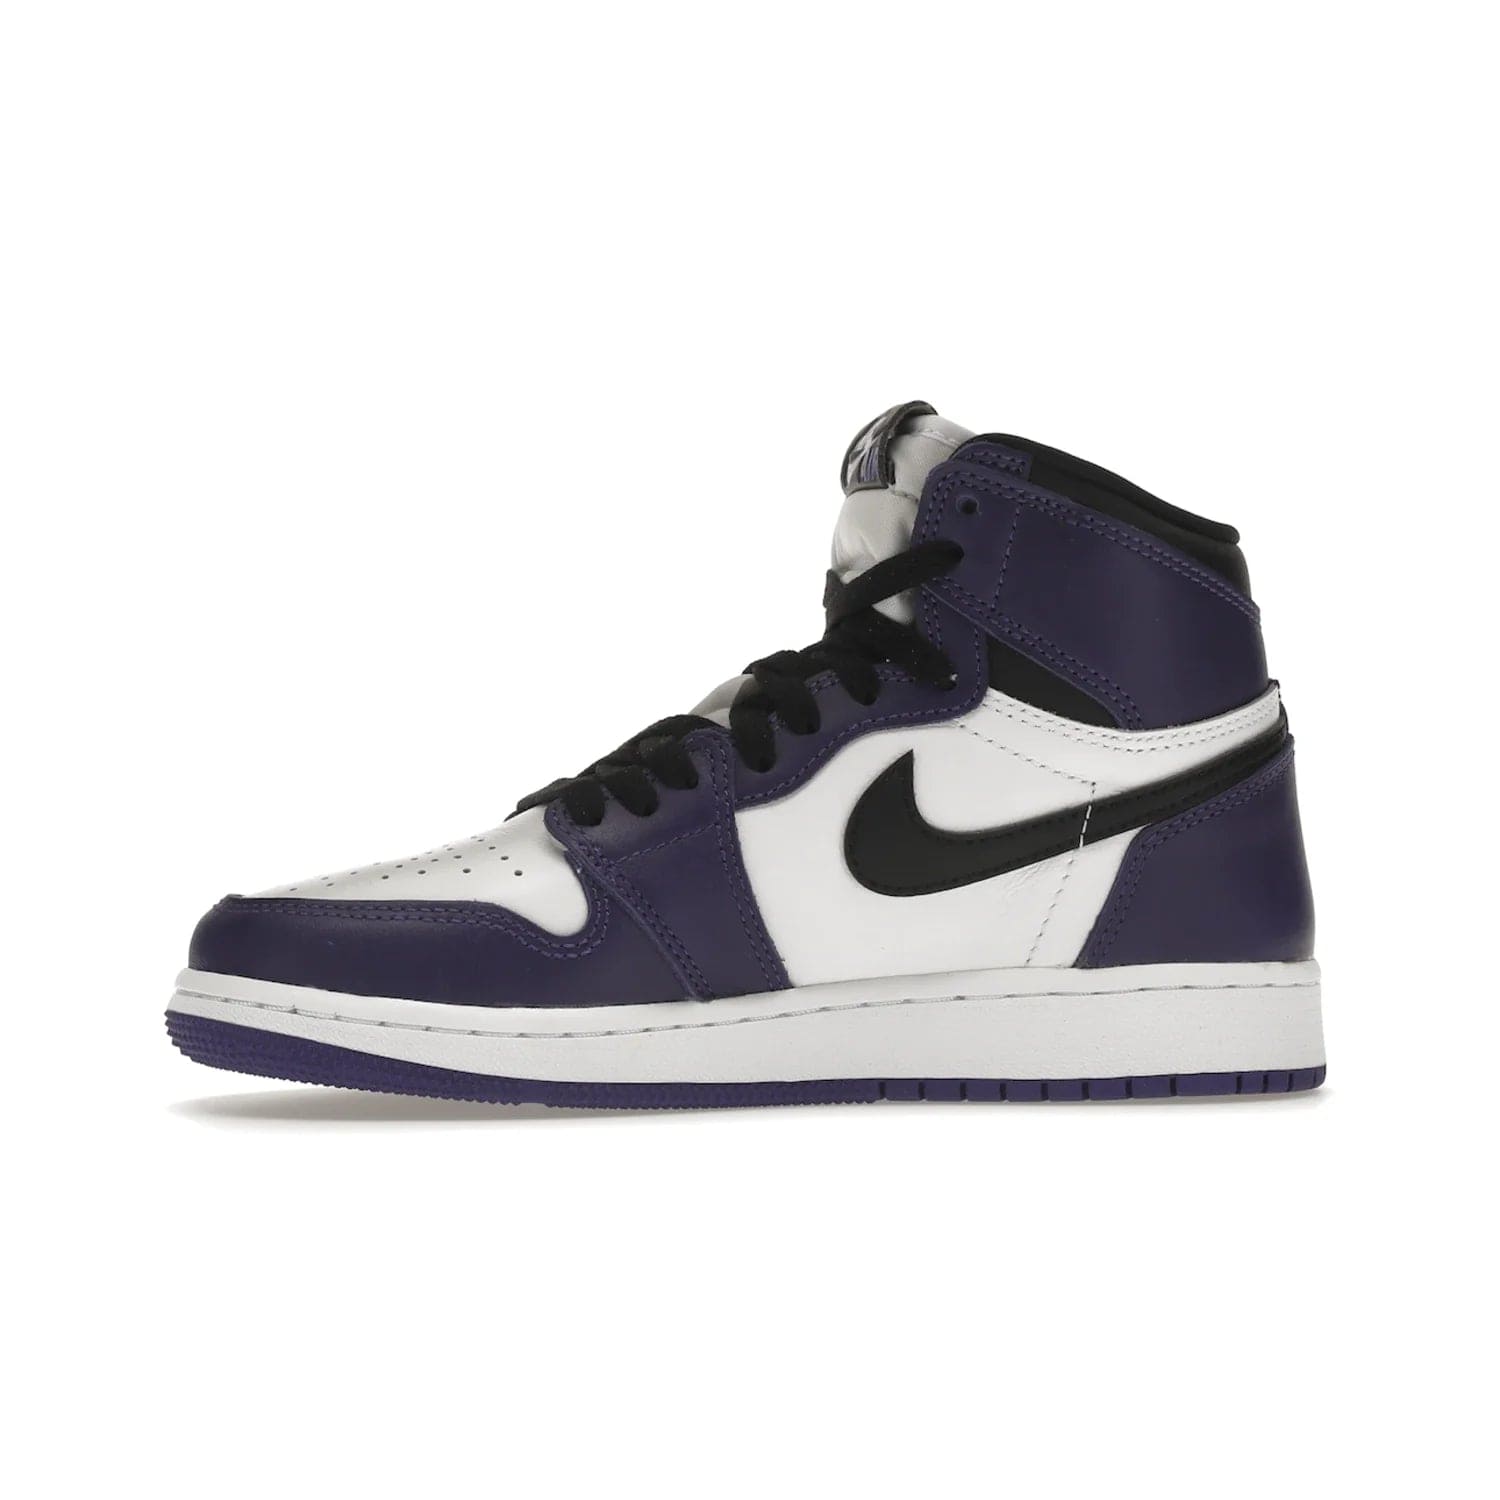 Jordan 1 Retro High Court Purple White (GS) - Image 18 - Only at www.BallersClubKickz.com - The Air Jordan 1 Retro High Court Purple is here and young sneaker heads can show off classic style. Features a white tumbled leather upper, black swoosh, purple overlays, black collar with purple overlay, white tongue, black patch with purple Nike Air logo and swoosh, white midsole, and purple rubber outsole with circular pattern.